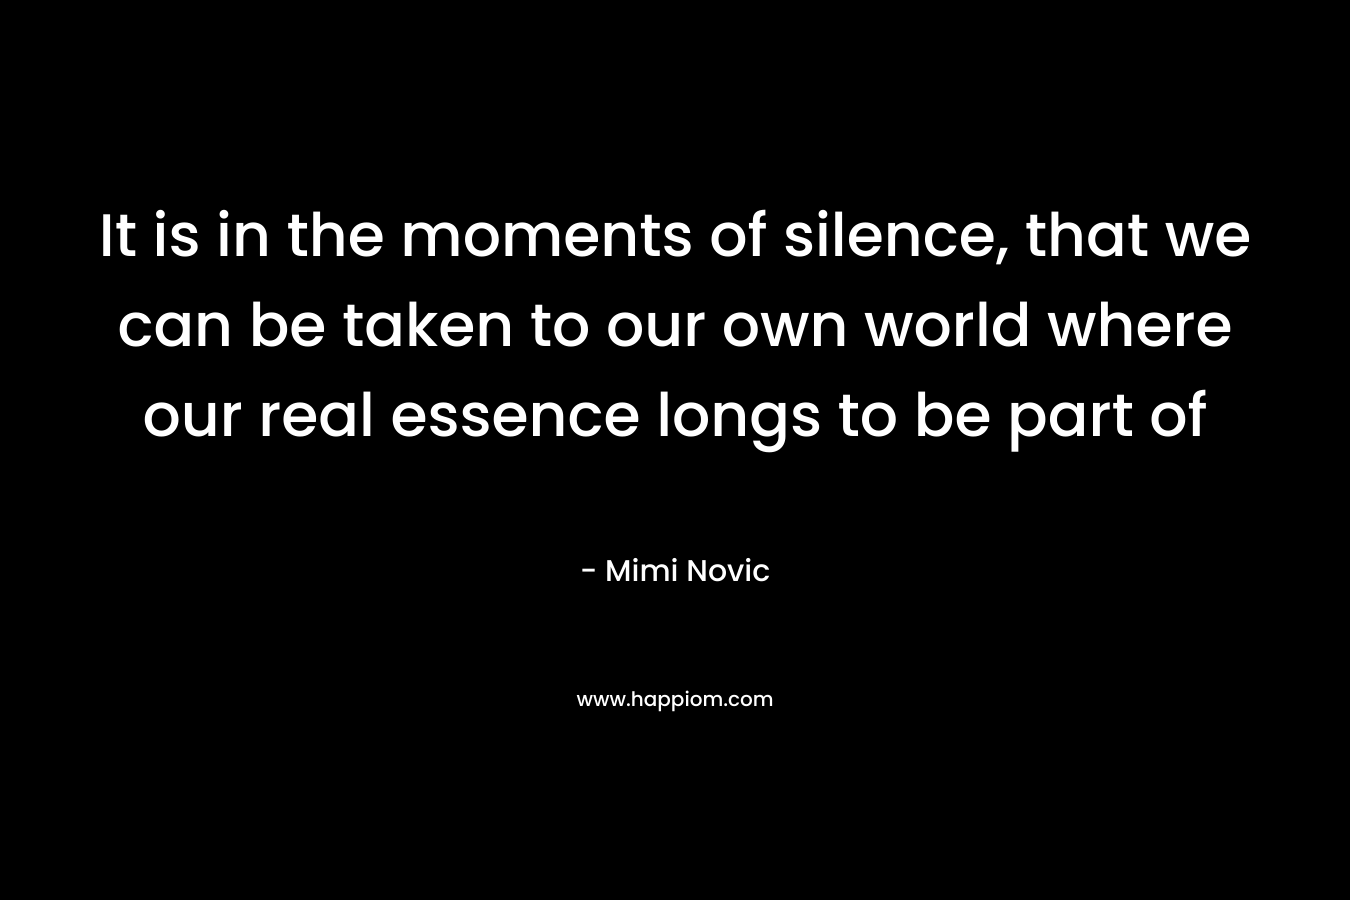 It is in the moments of silence, that we can be taken to our own world where our real essence longs to be part of – Mimi Novic